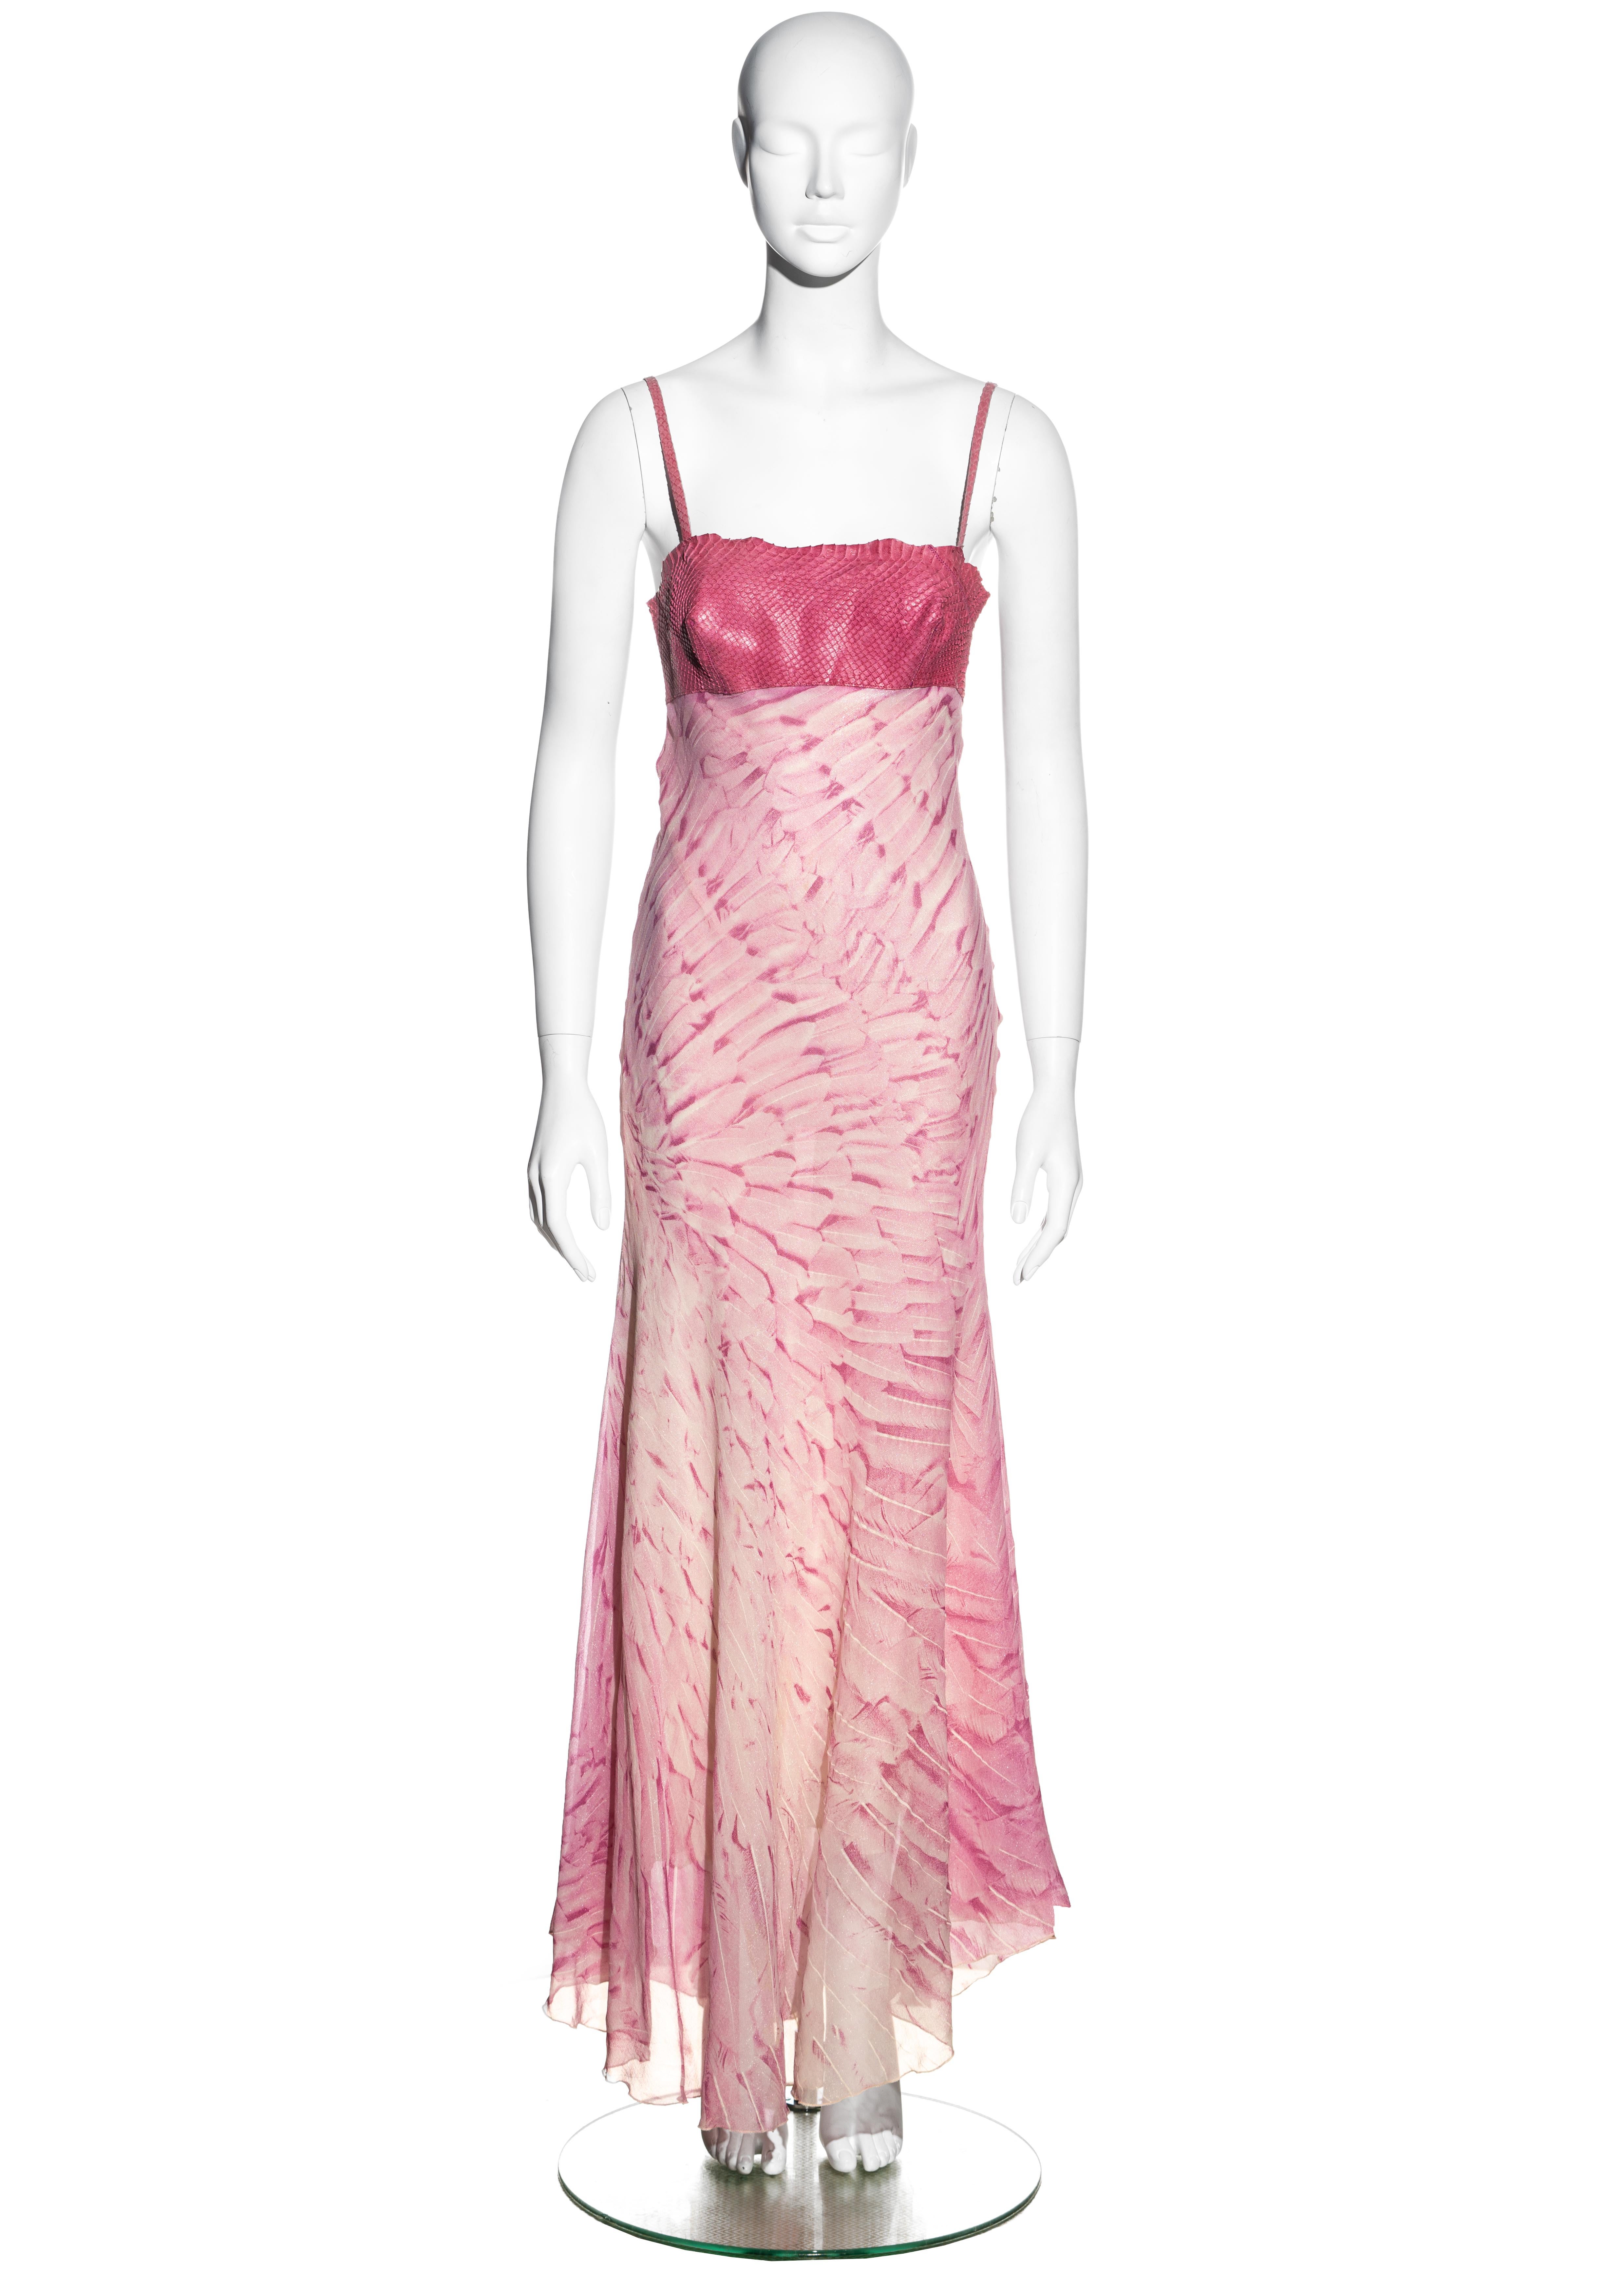 ▪ Roberto Cavalli pink silk evening dress
▪ 100% Silk, 100% Leather
▪ Snakeskin bust with spaghetti straps 
▪ Pink feather print 
▪ Hook fastenings at centre back 
▪ Asymmetric hemline 
▪ Size Small 
▪ Spring-Summer 1999